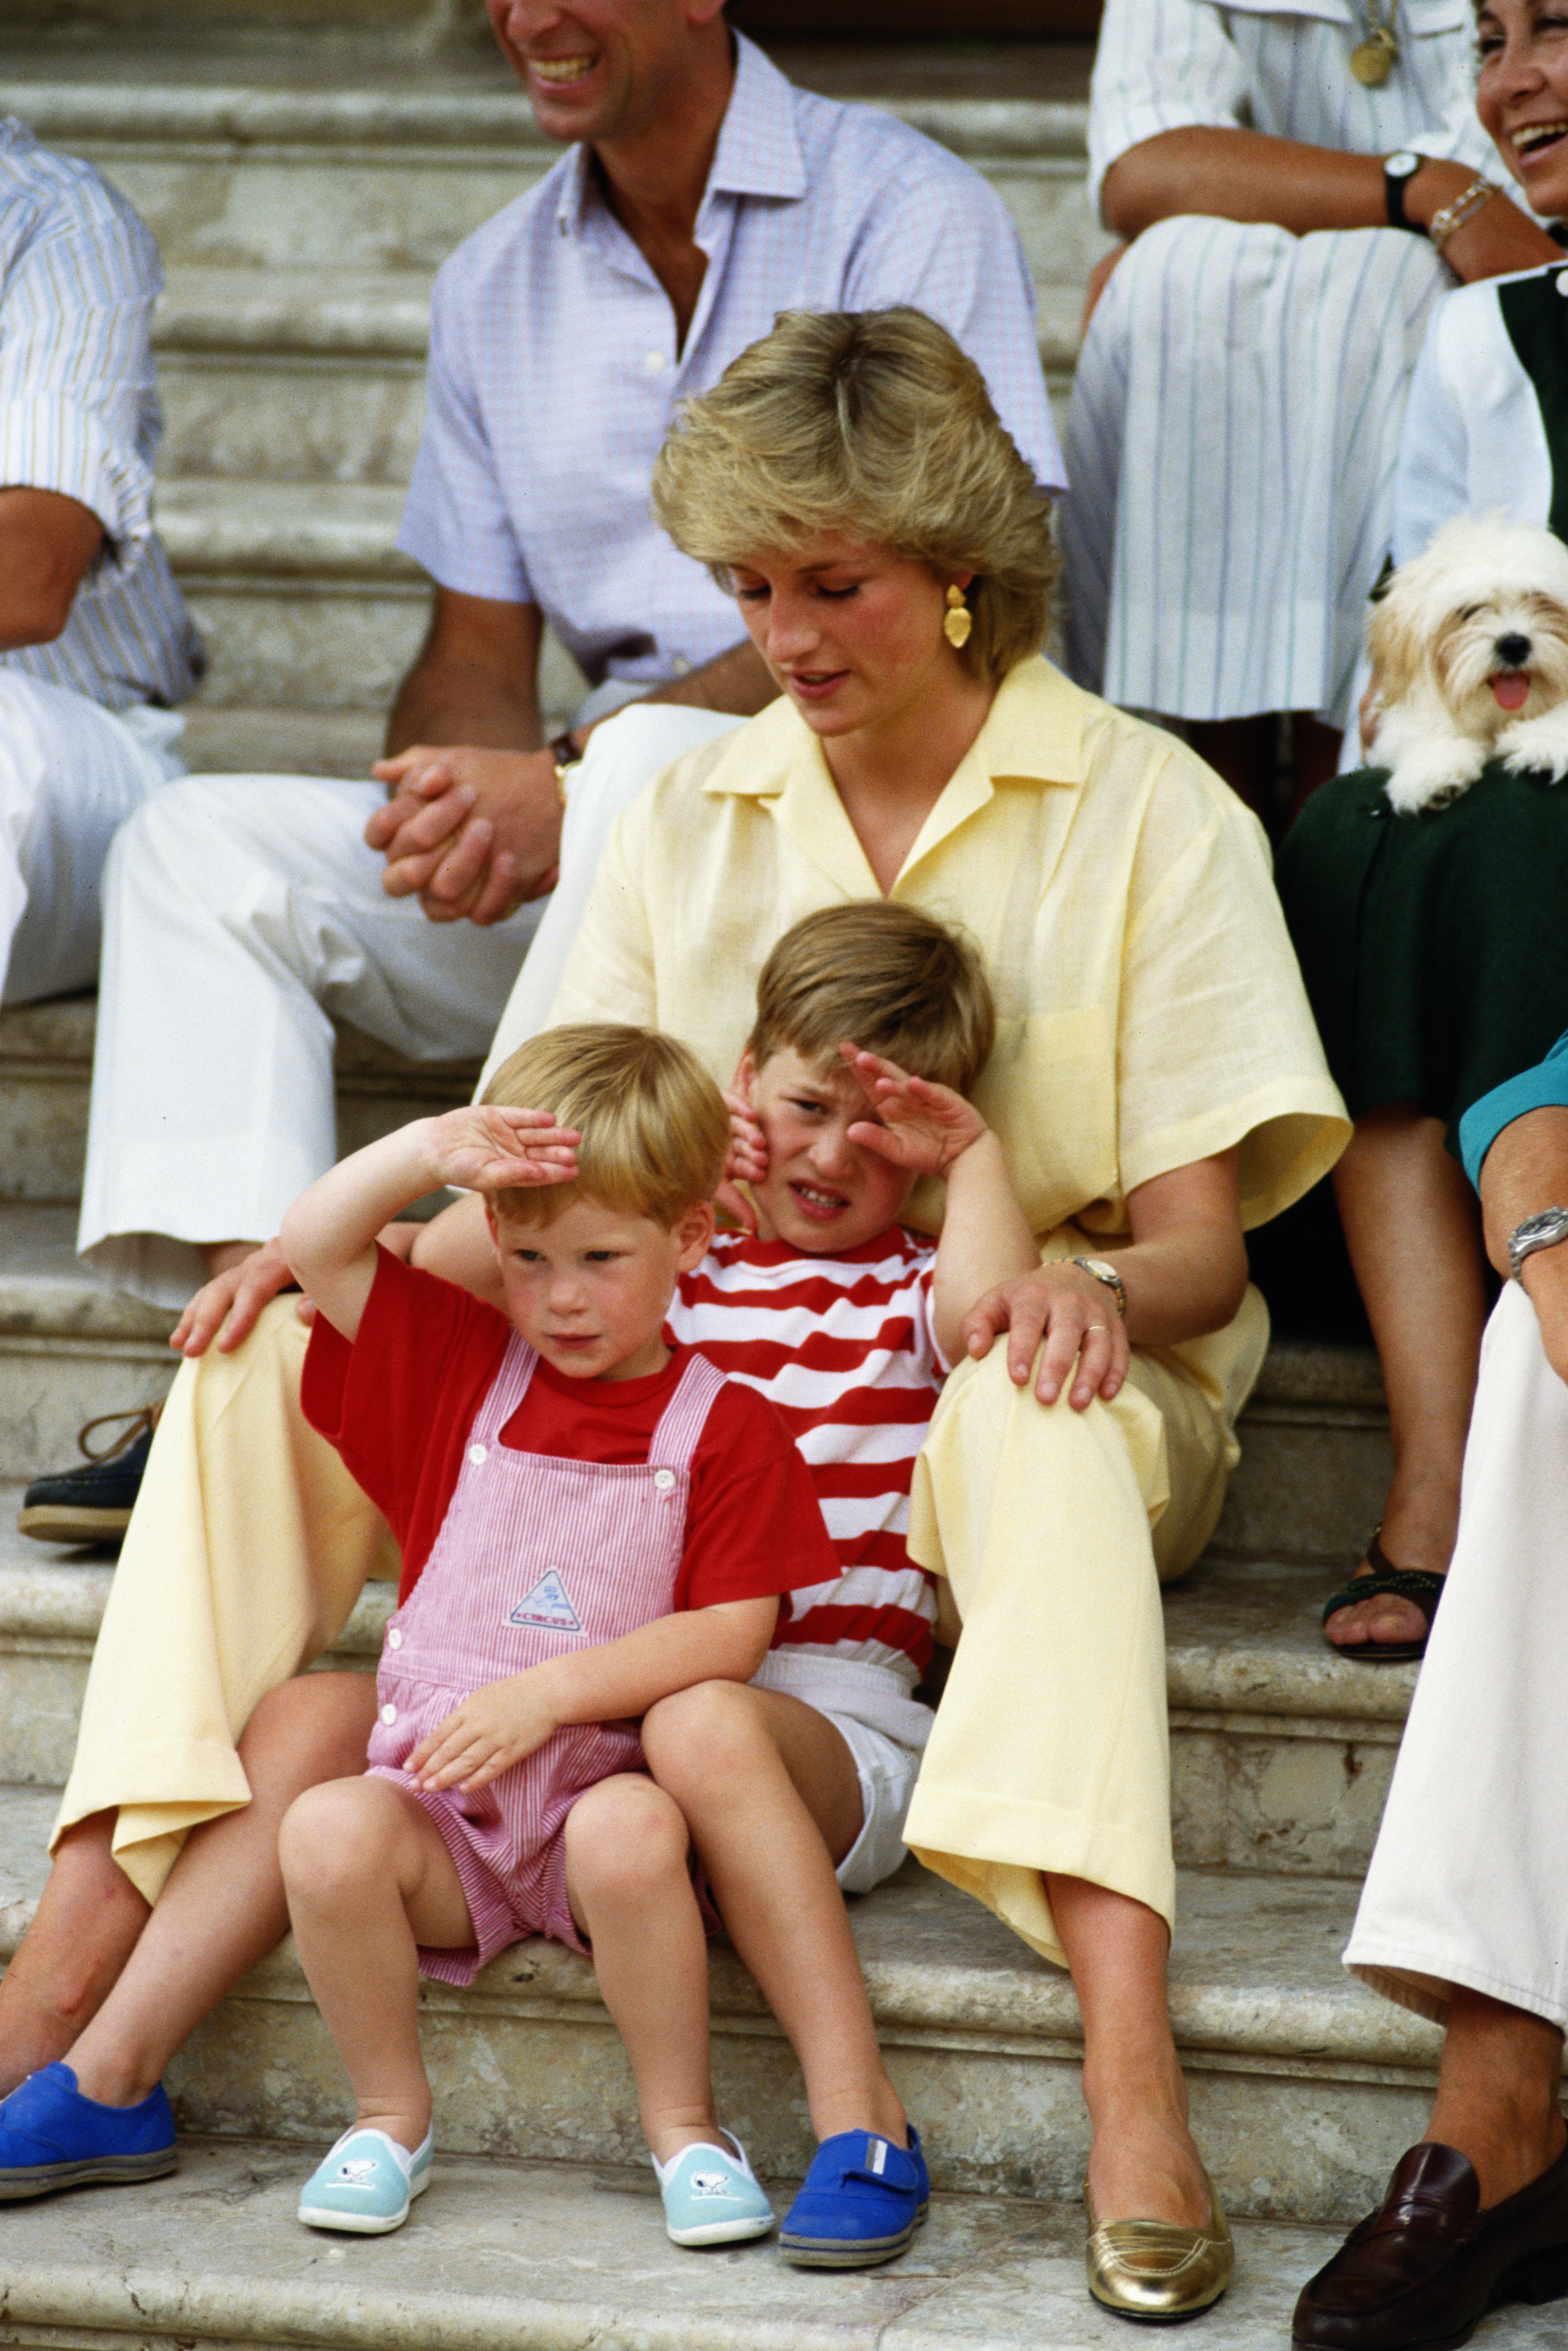 Diana, Princess of Wales photographed with her children Prince Harry and Prince William on holiday at Marivent Palace in August 1987 in Majorca. | Source: Getty Images